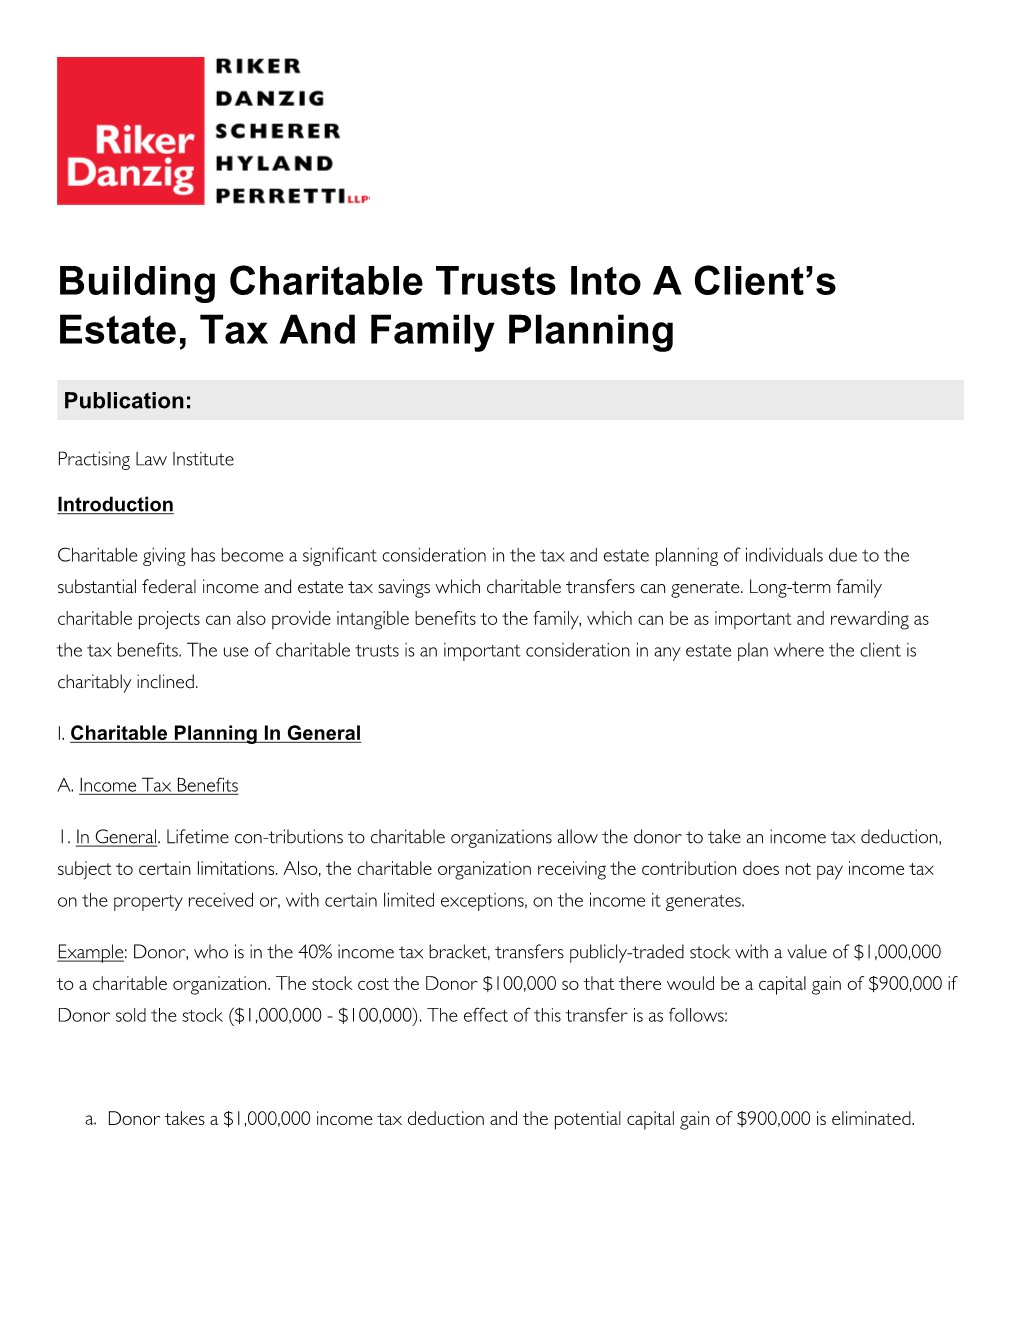 Building Charitable Trusts Into a Client's Estate, Tax and Family